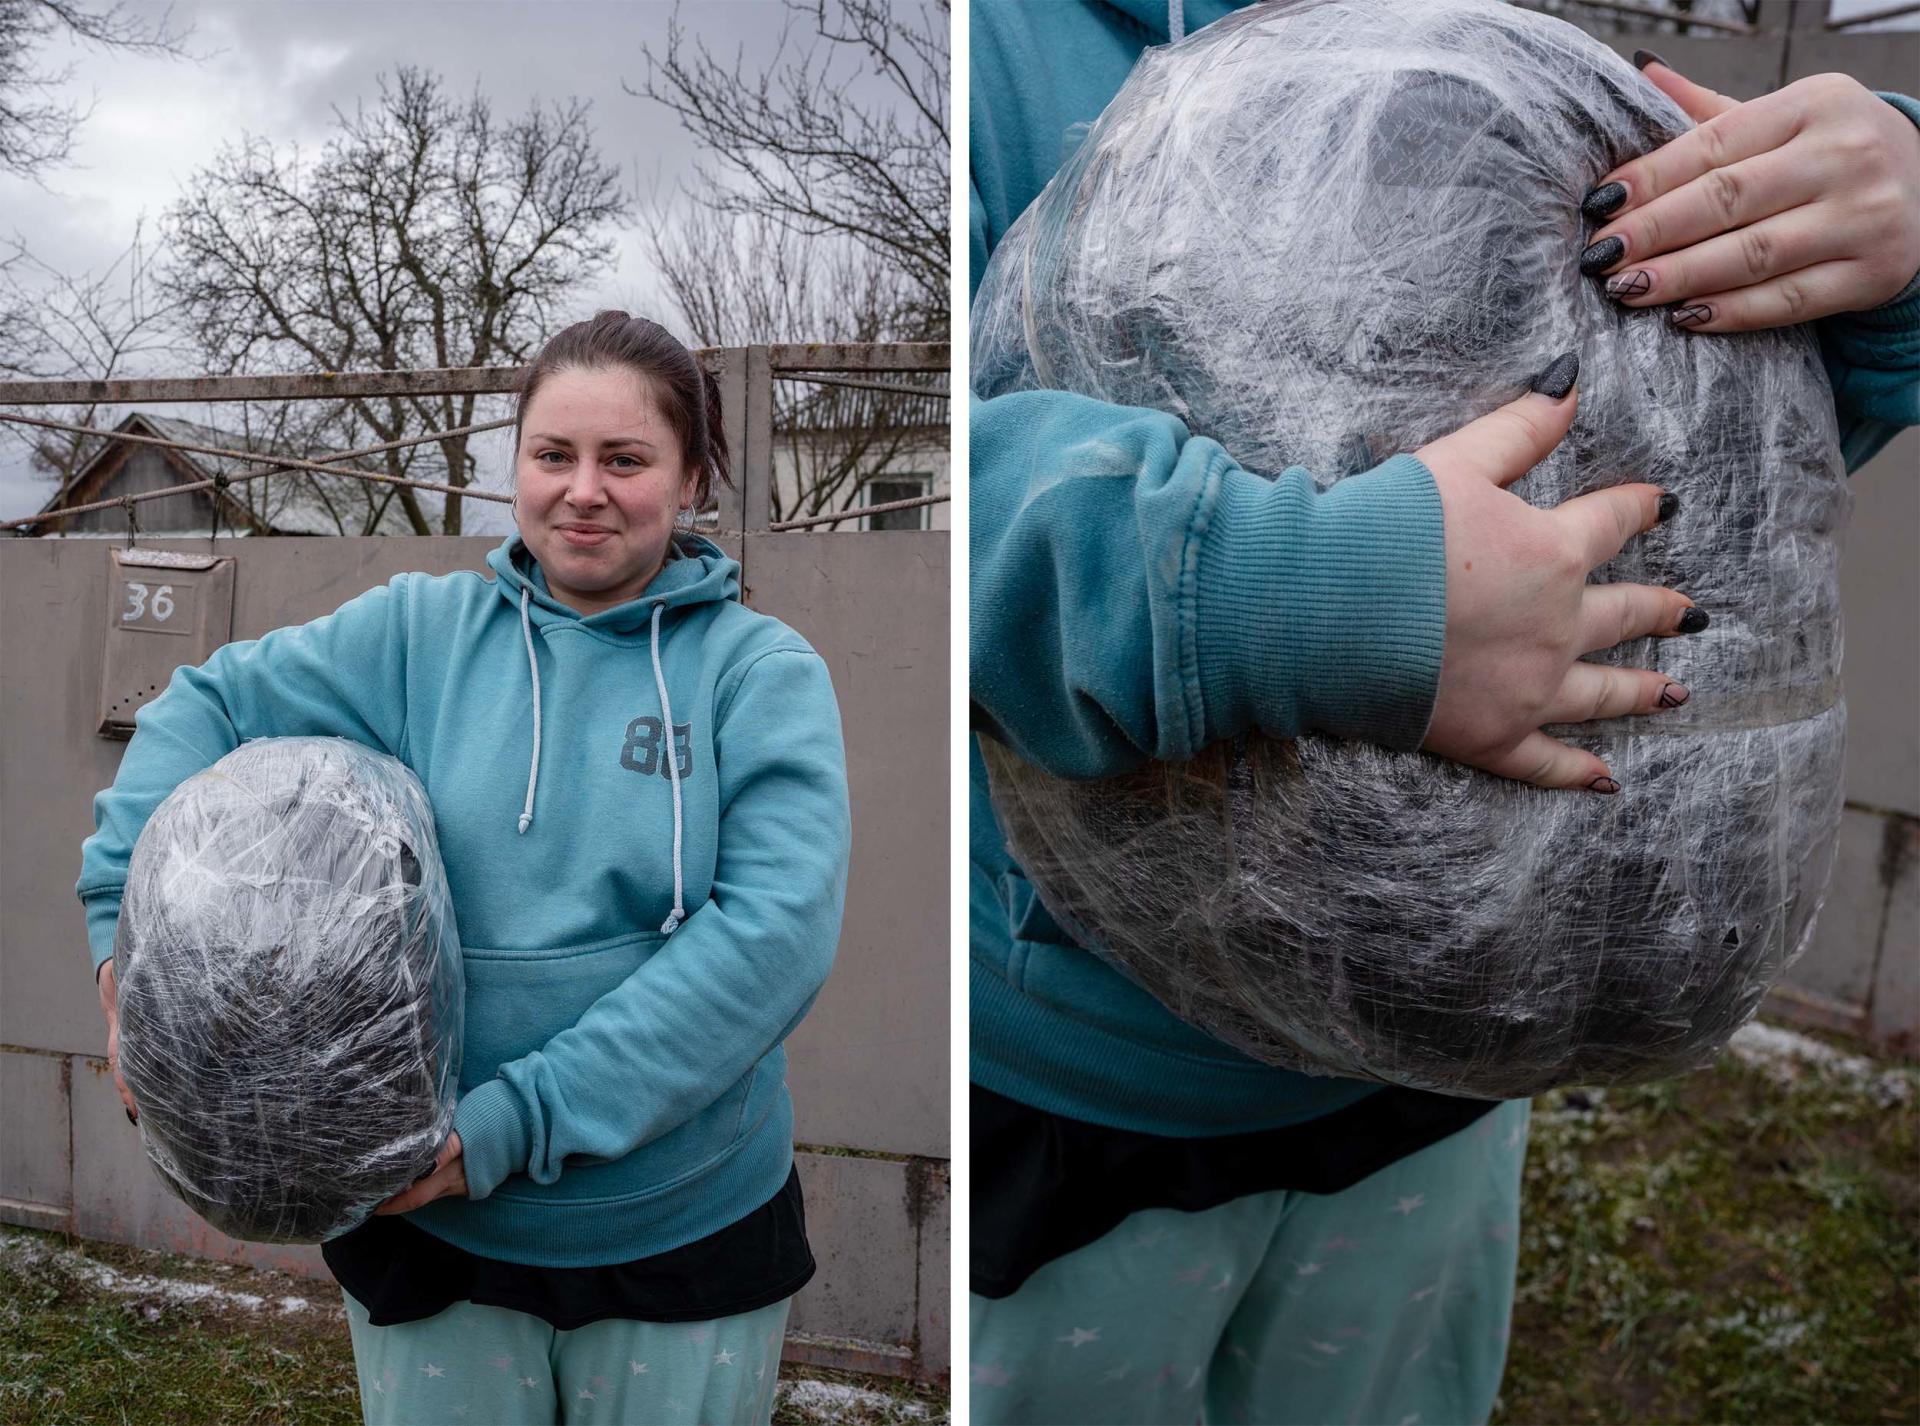 Alina, 26, picks up a parcel of clothes ordered by her mother, in Yasnohorodka (Ukraine), on January 6, 2023.